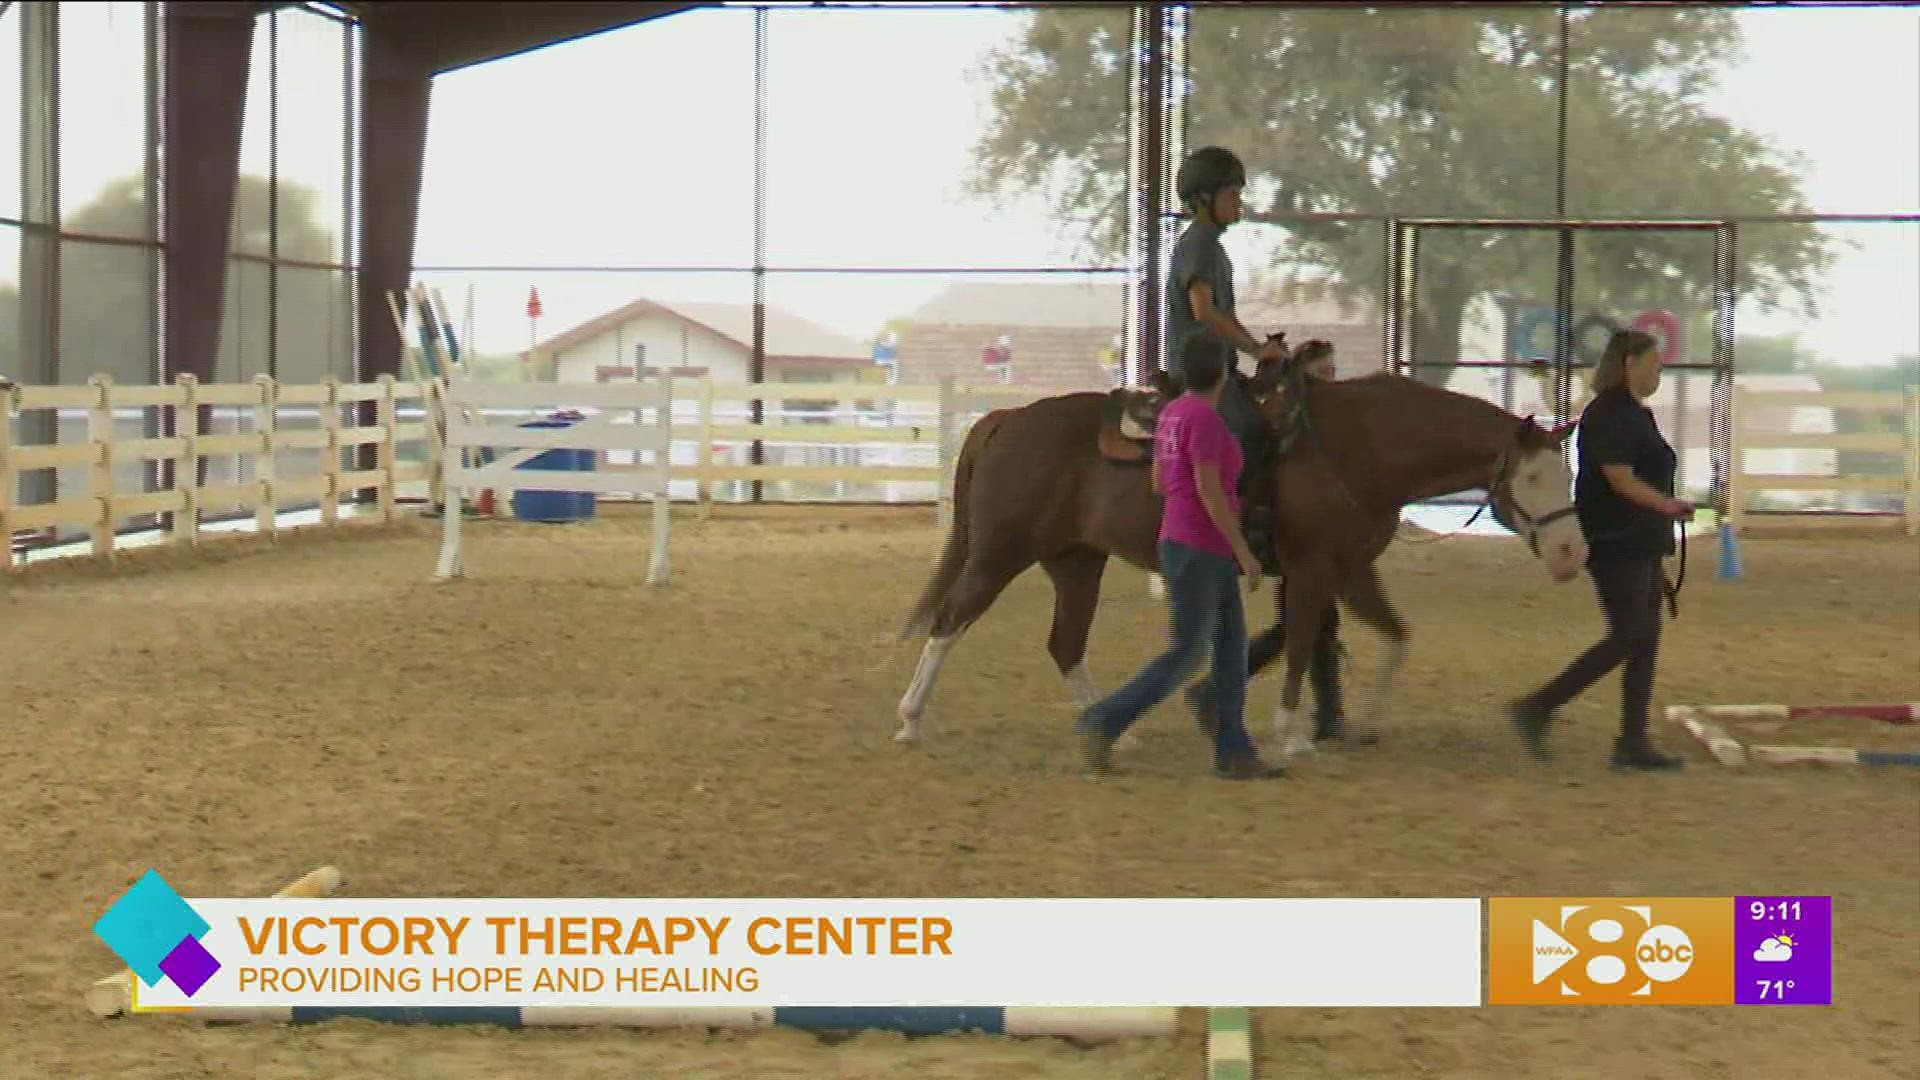 The center uses the healing power of horses to address physical, emotional and mental needs of children, adults, veterans and first responders.